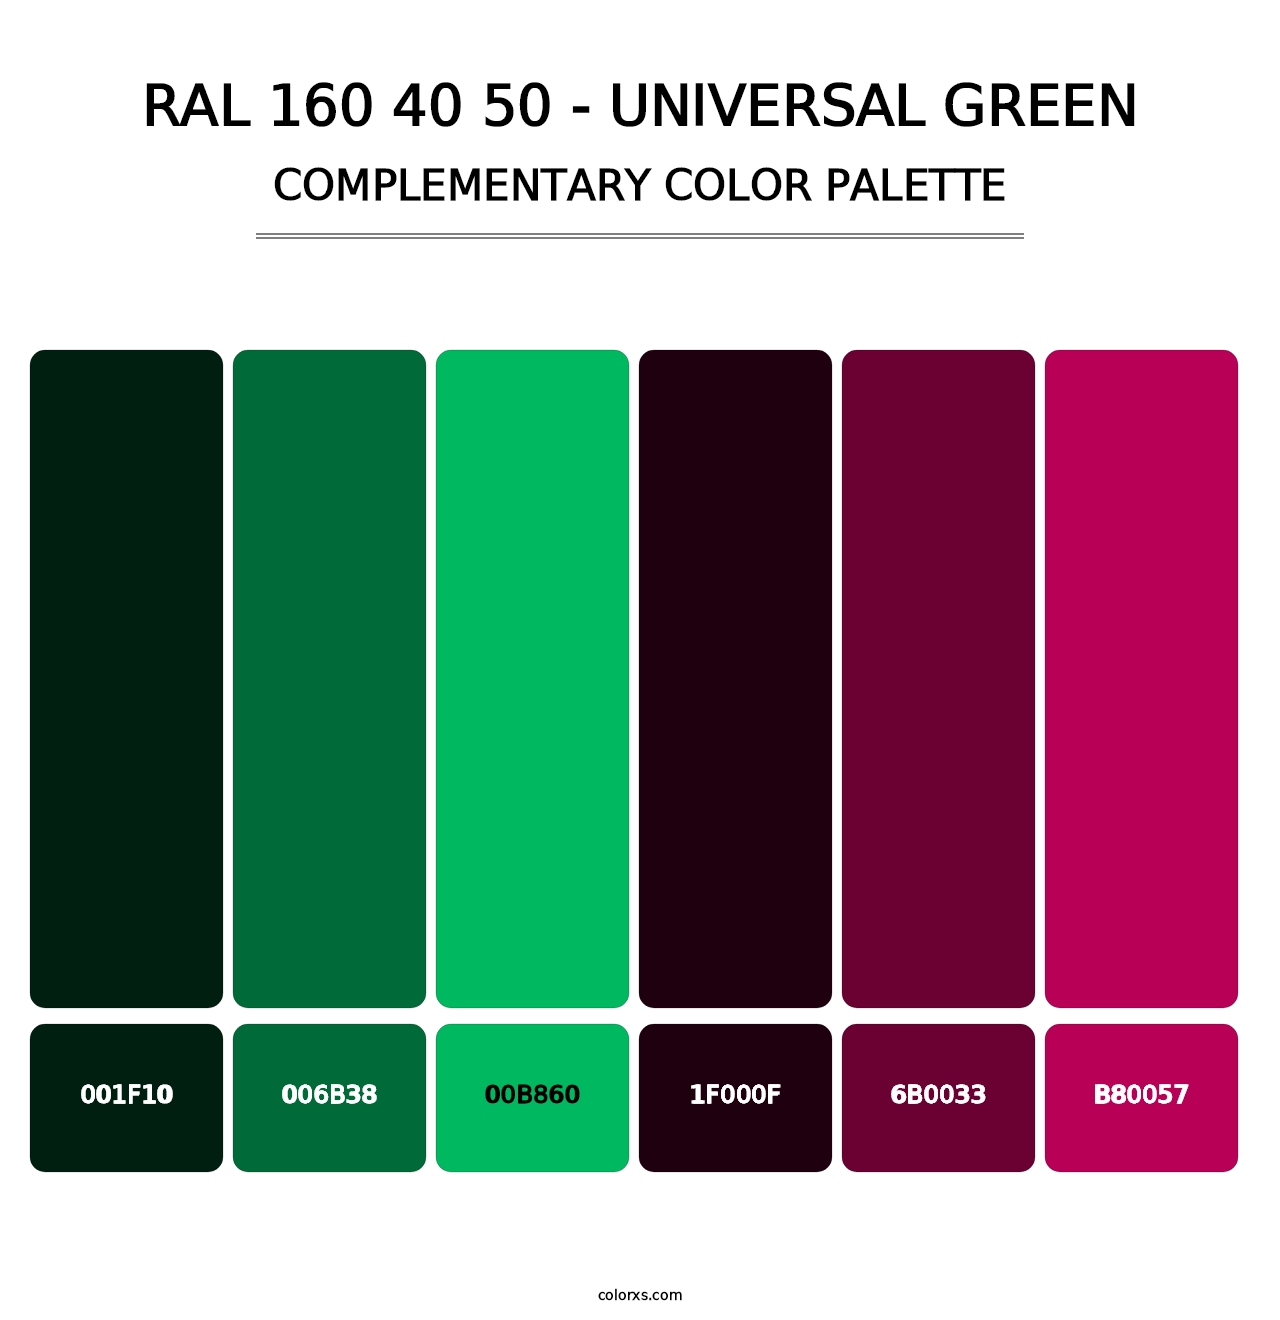 RAL 160 40 50 - Universal Green - Complementary Color Palette